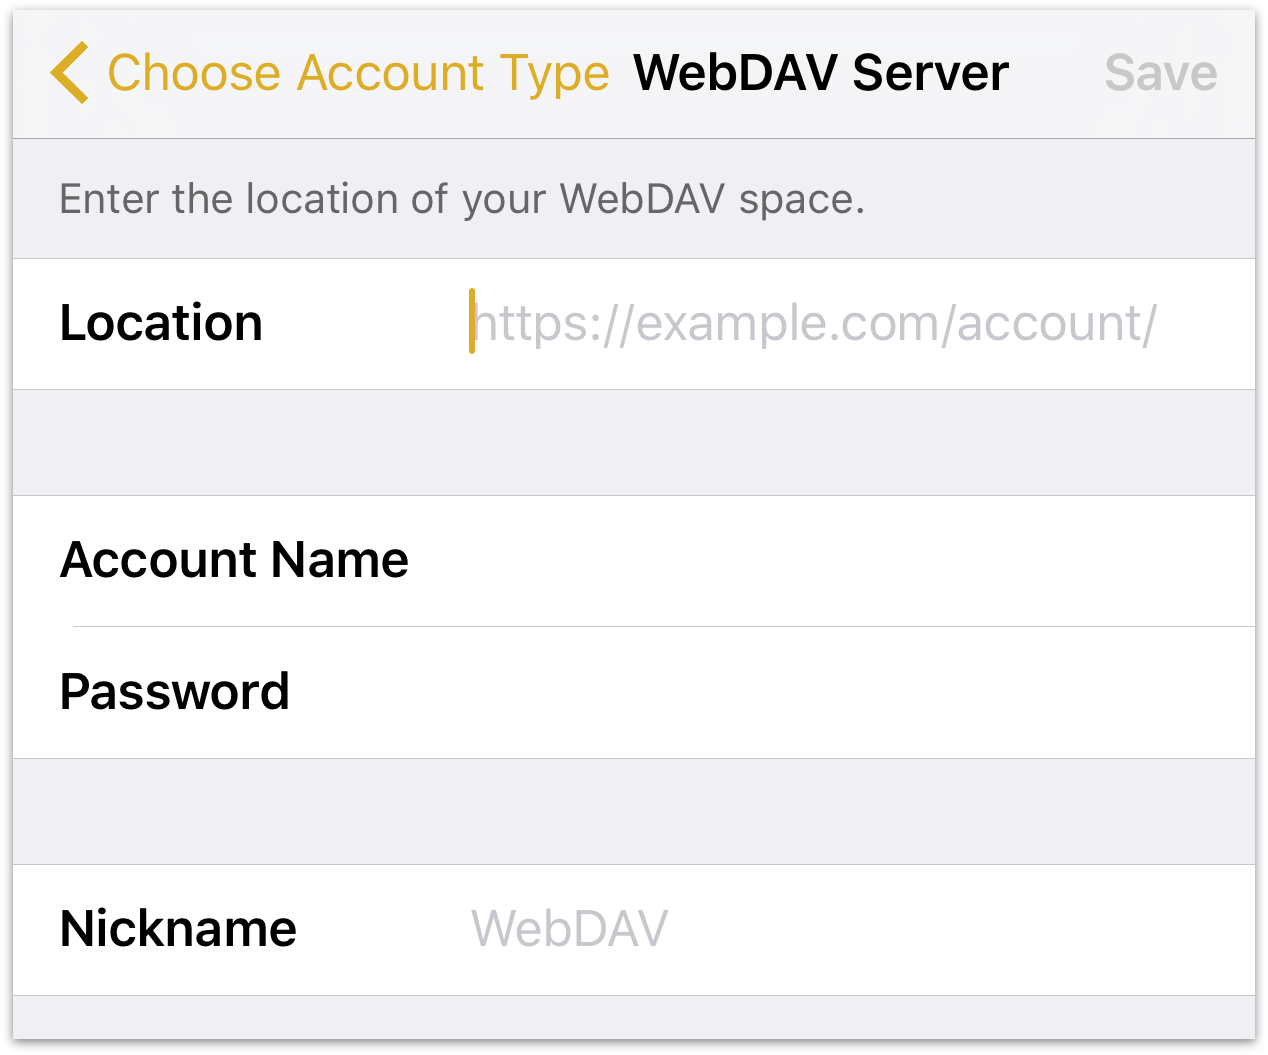 Enter the credentials for your WebDAV account.